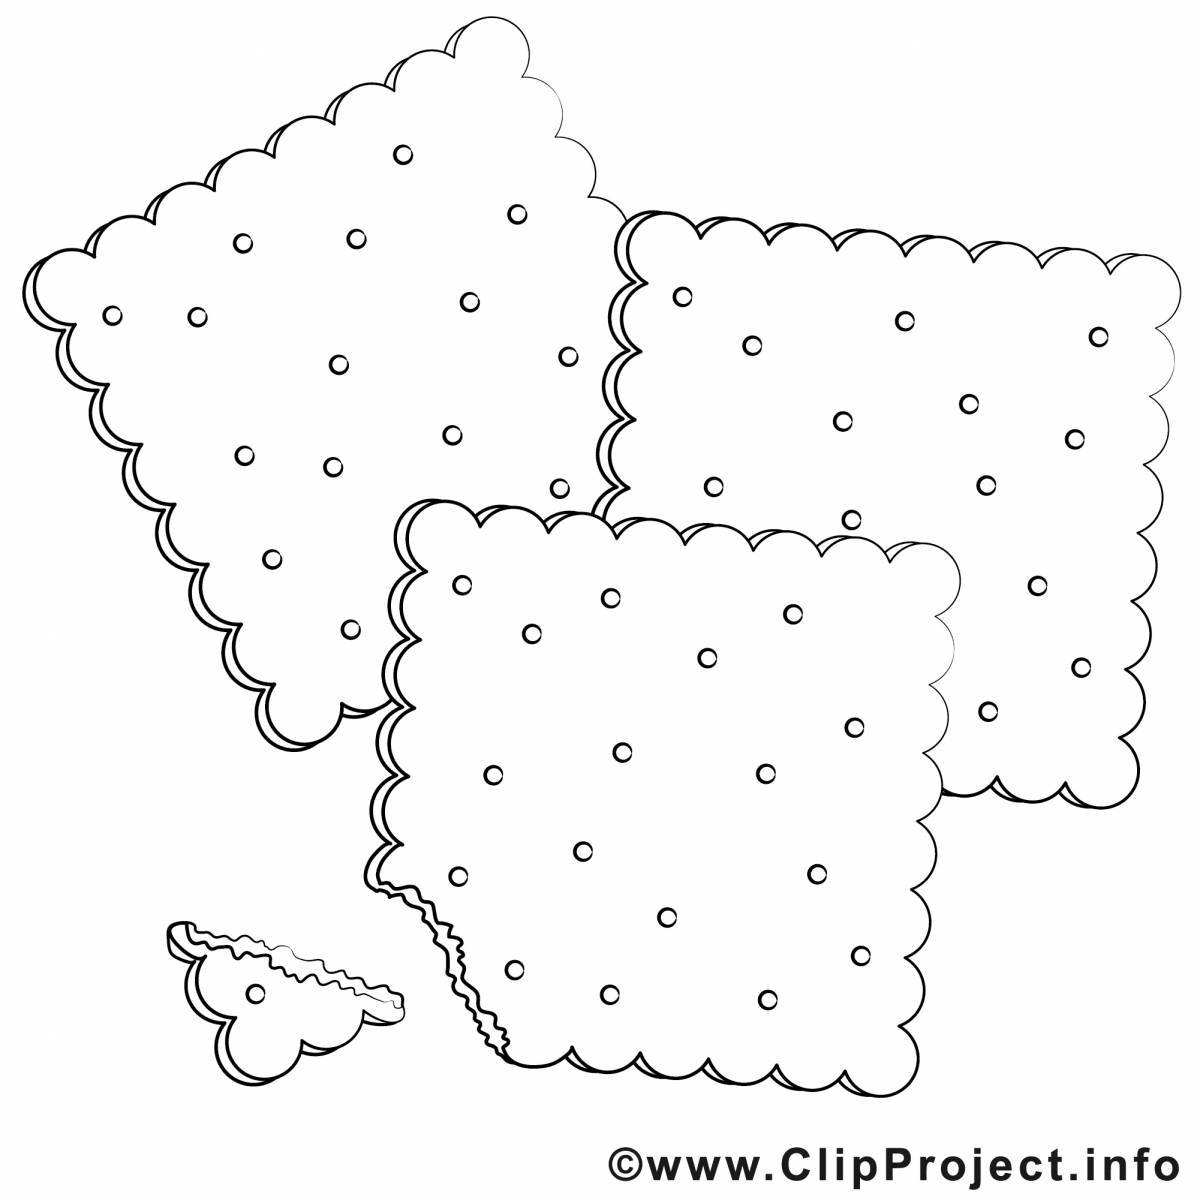 Holiday cookie coloring page